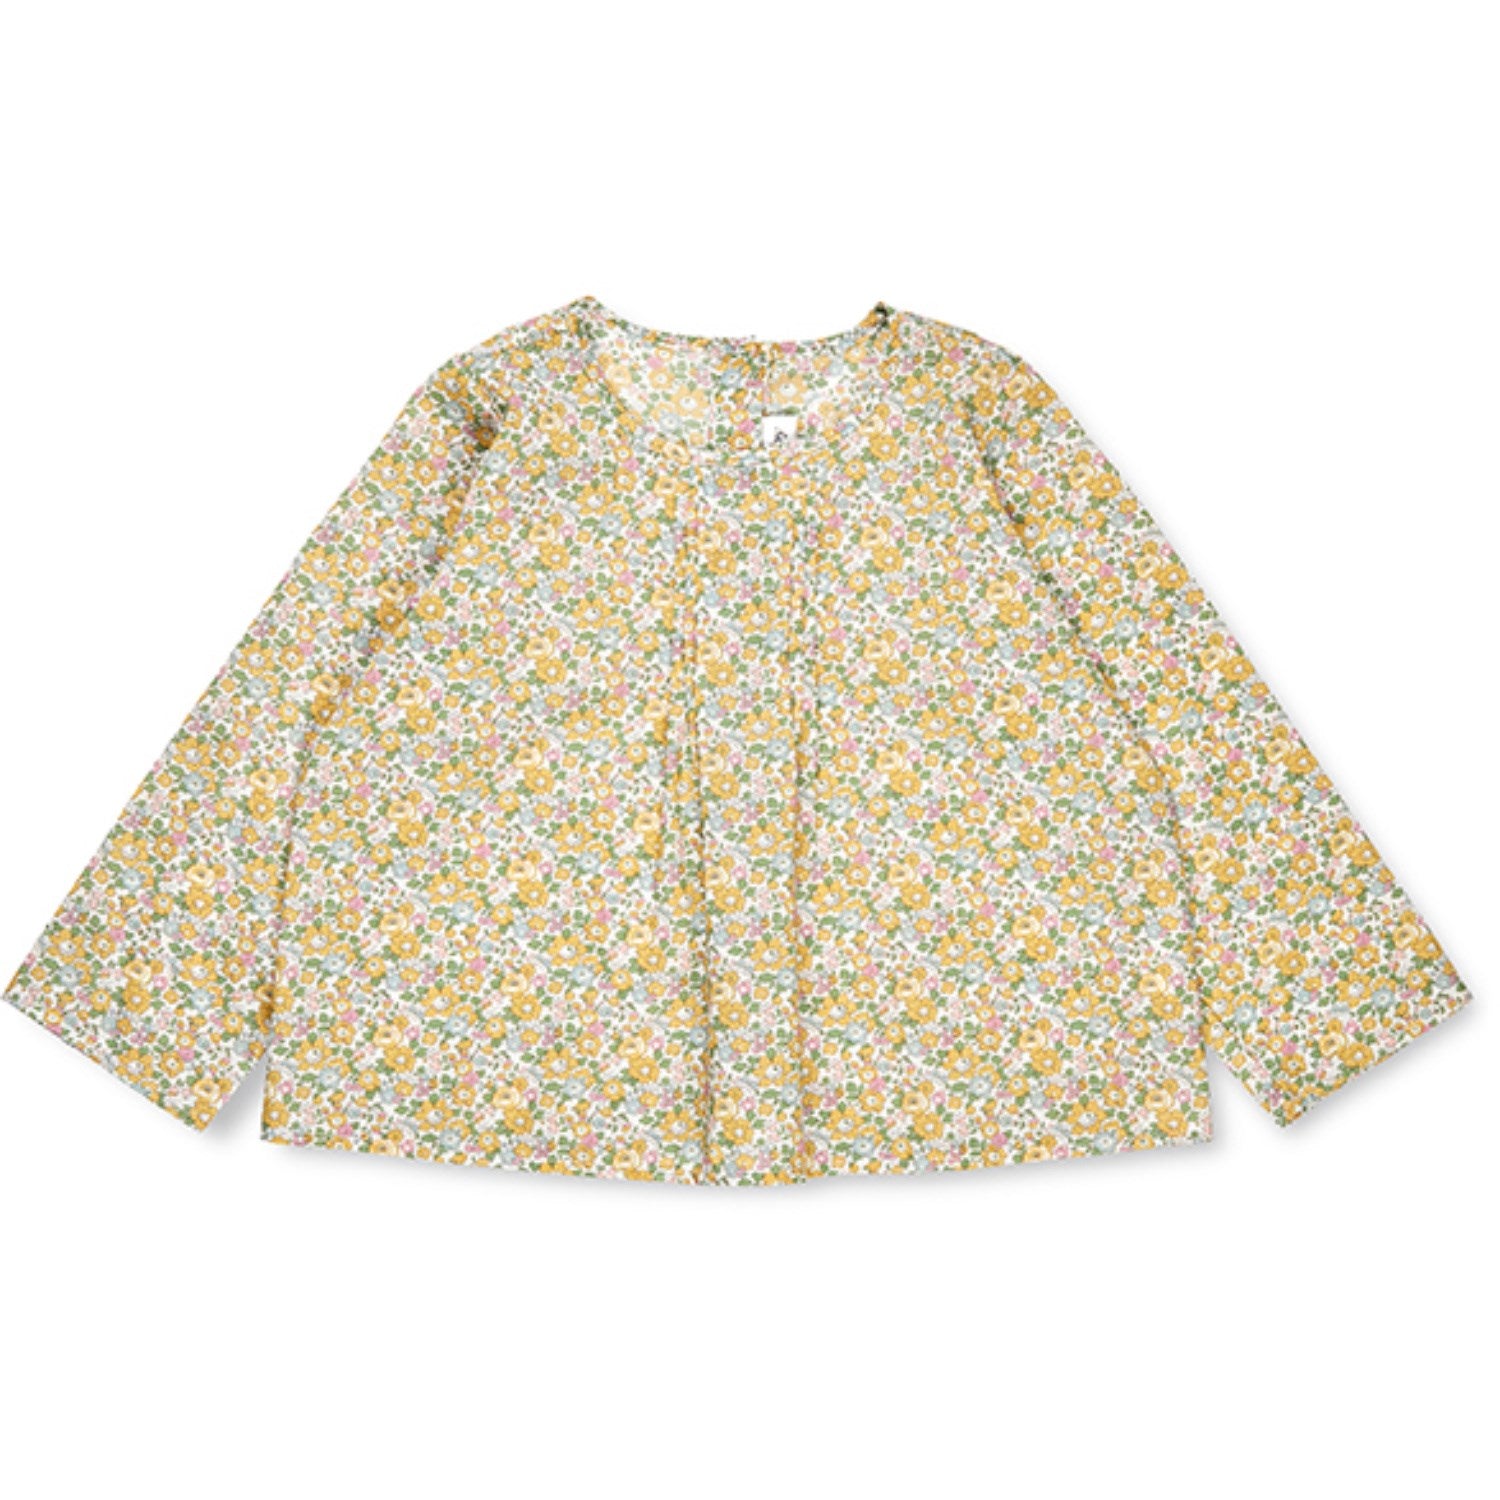 Lalaby Betsy Ann Holly Top (Kids) - Betsy Ann